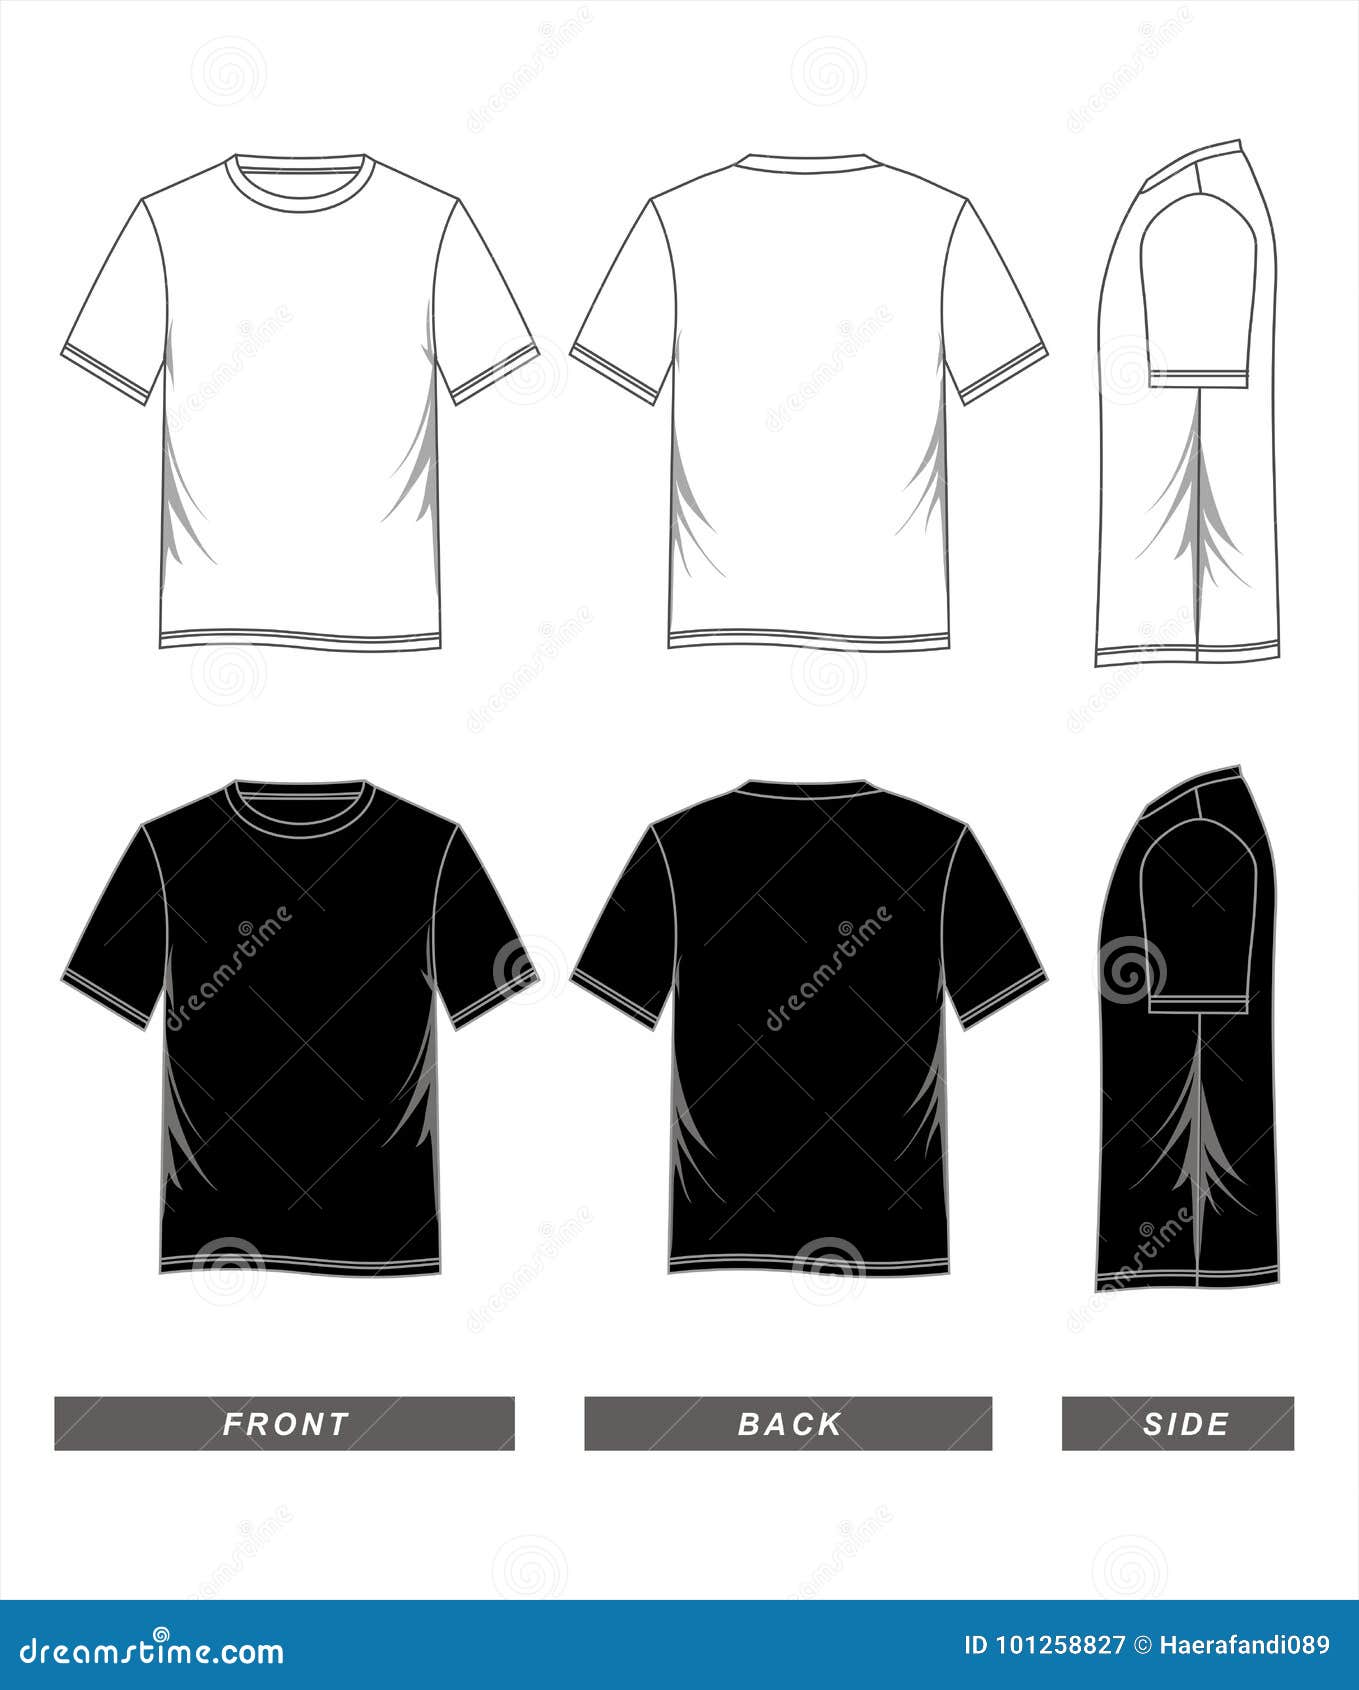 t-shirt template black white, front, back, side